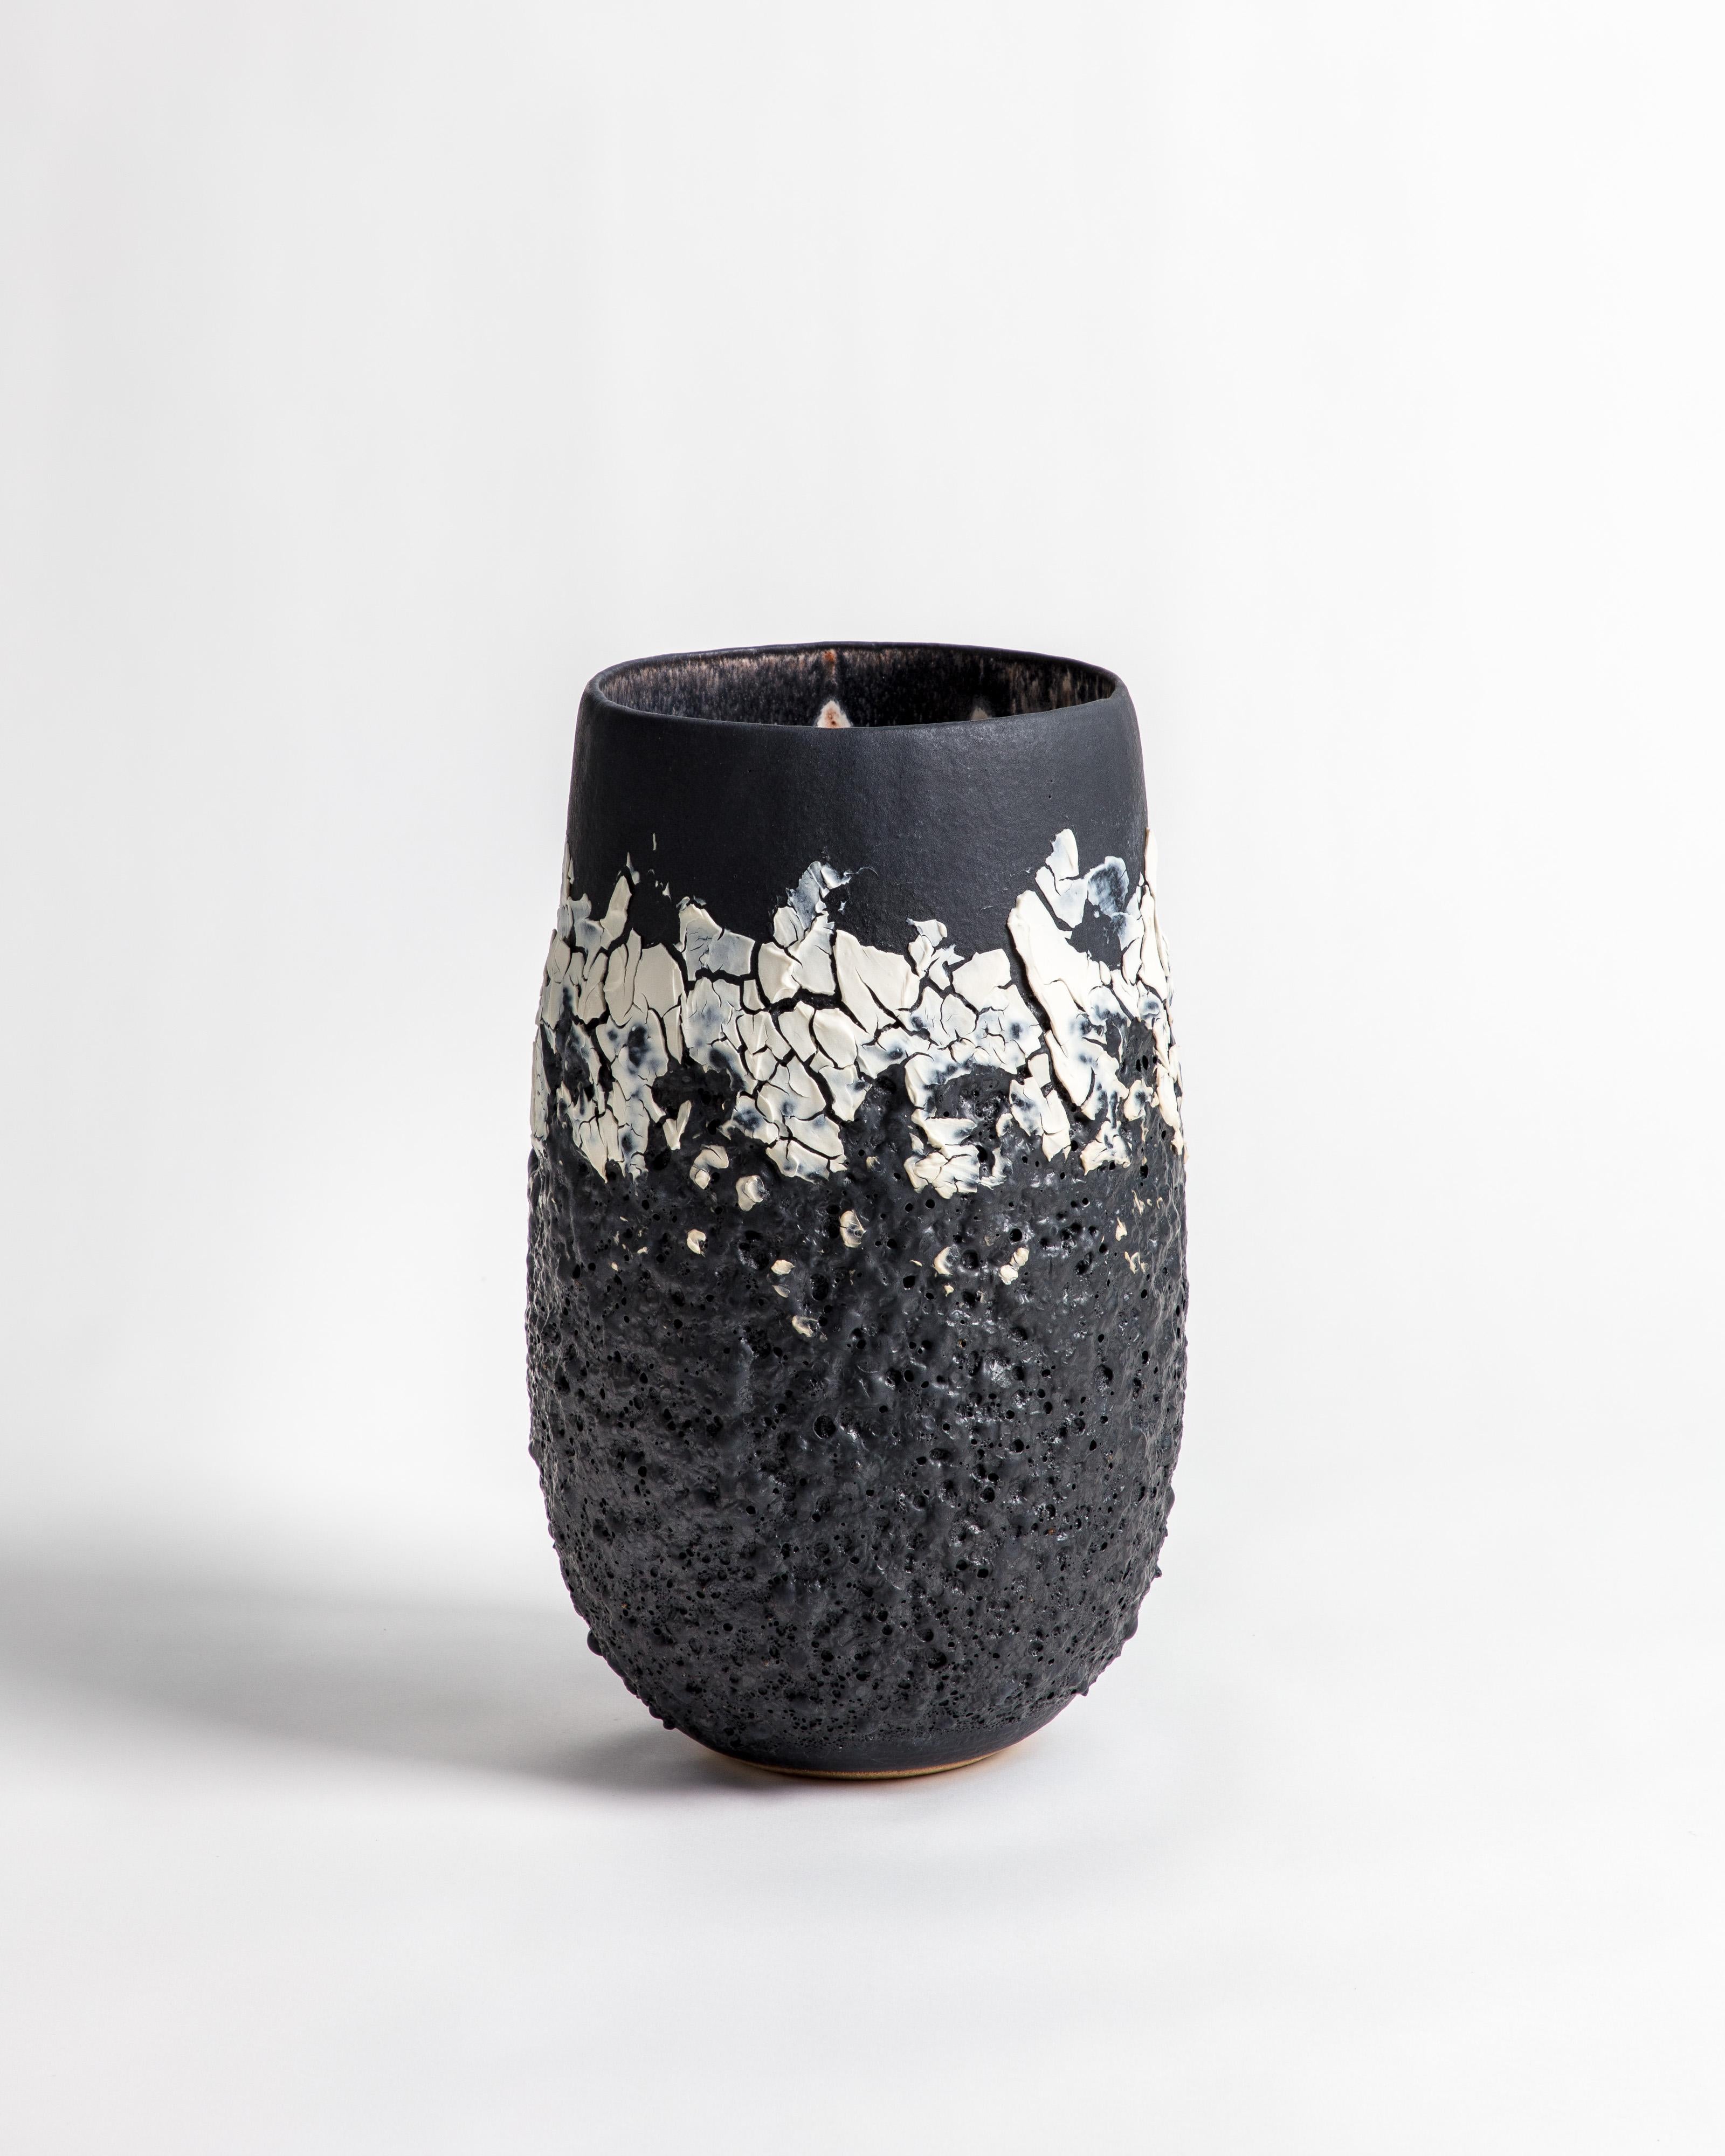 A black bubble lava textured volcanic open vessel with black and white glaze and markings. Made from textured stoneware clay and porcelain engobe.

Inspiration for the piece comes from the clay itself and the chemical relationships that glaze and